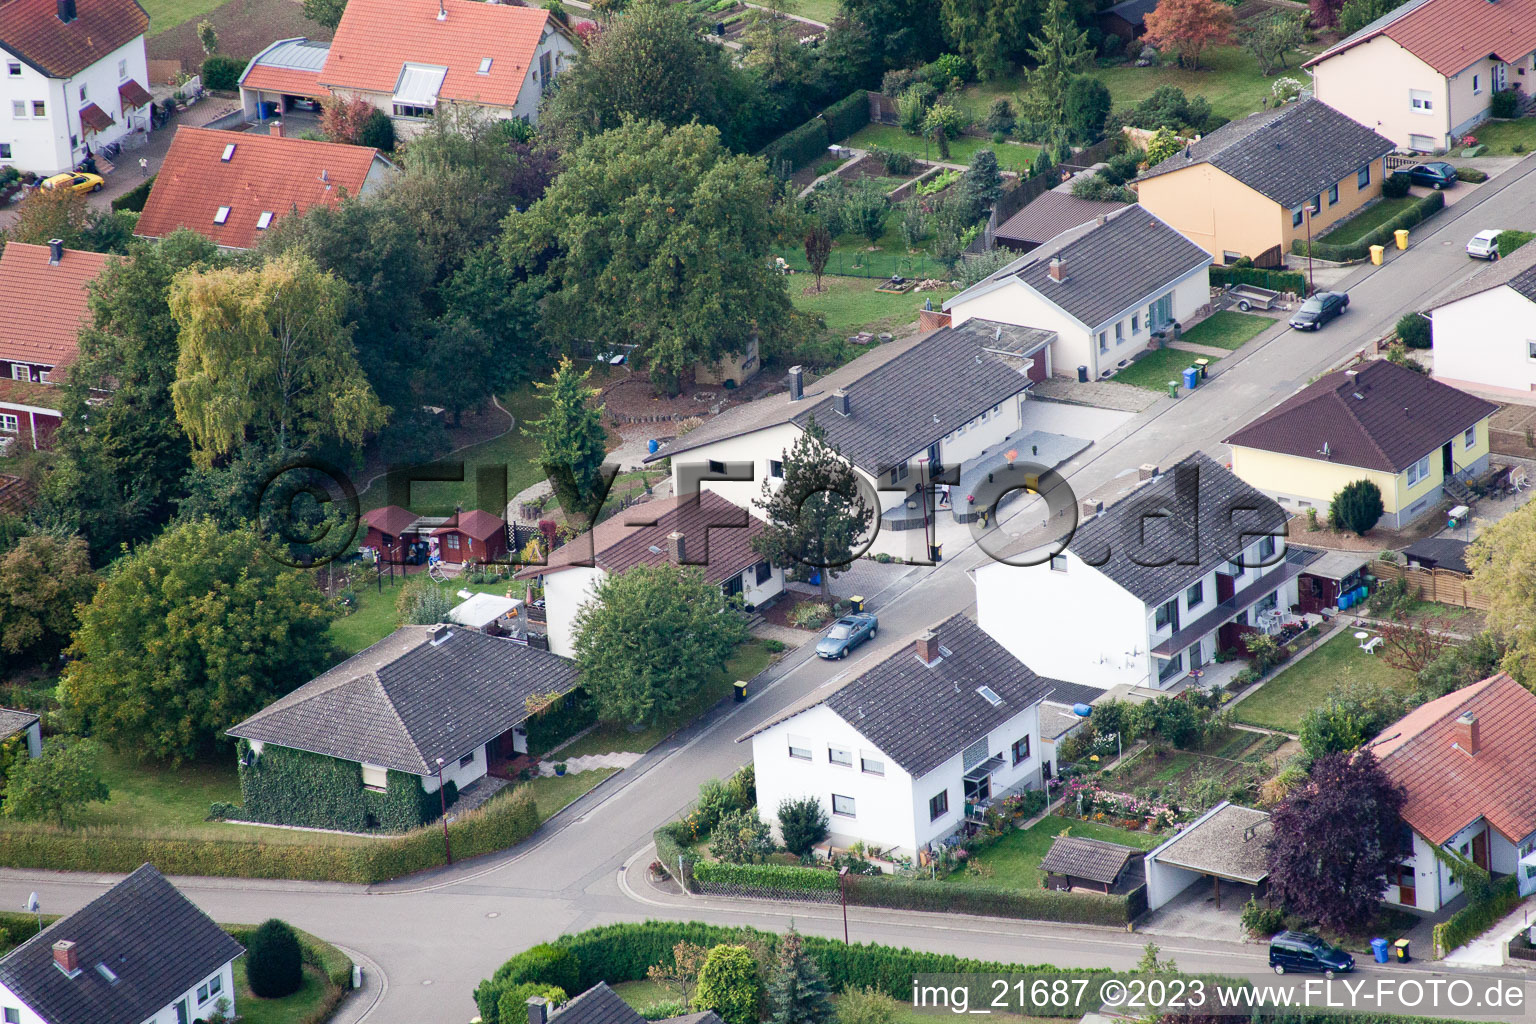 Aerial photograpy of In the mill garden in Eppelsheim in the state Rhineland-Palatinate, Germany